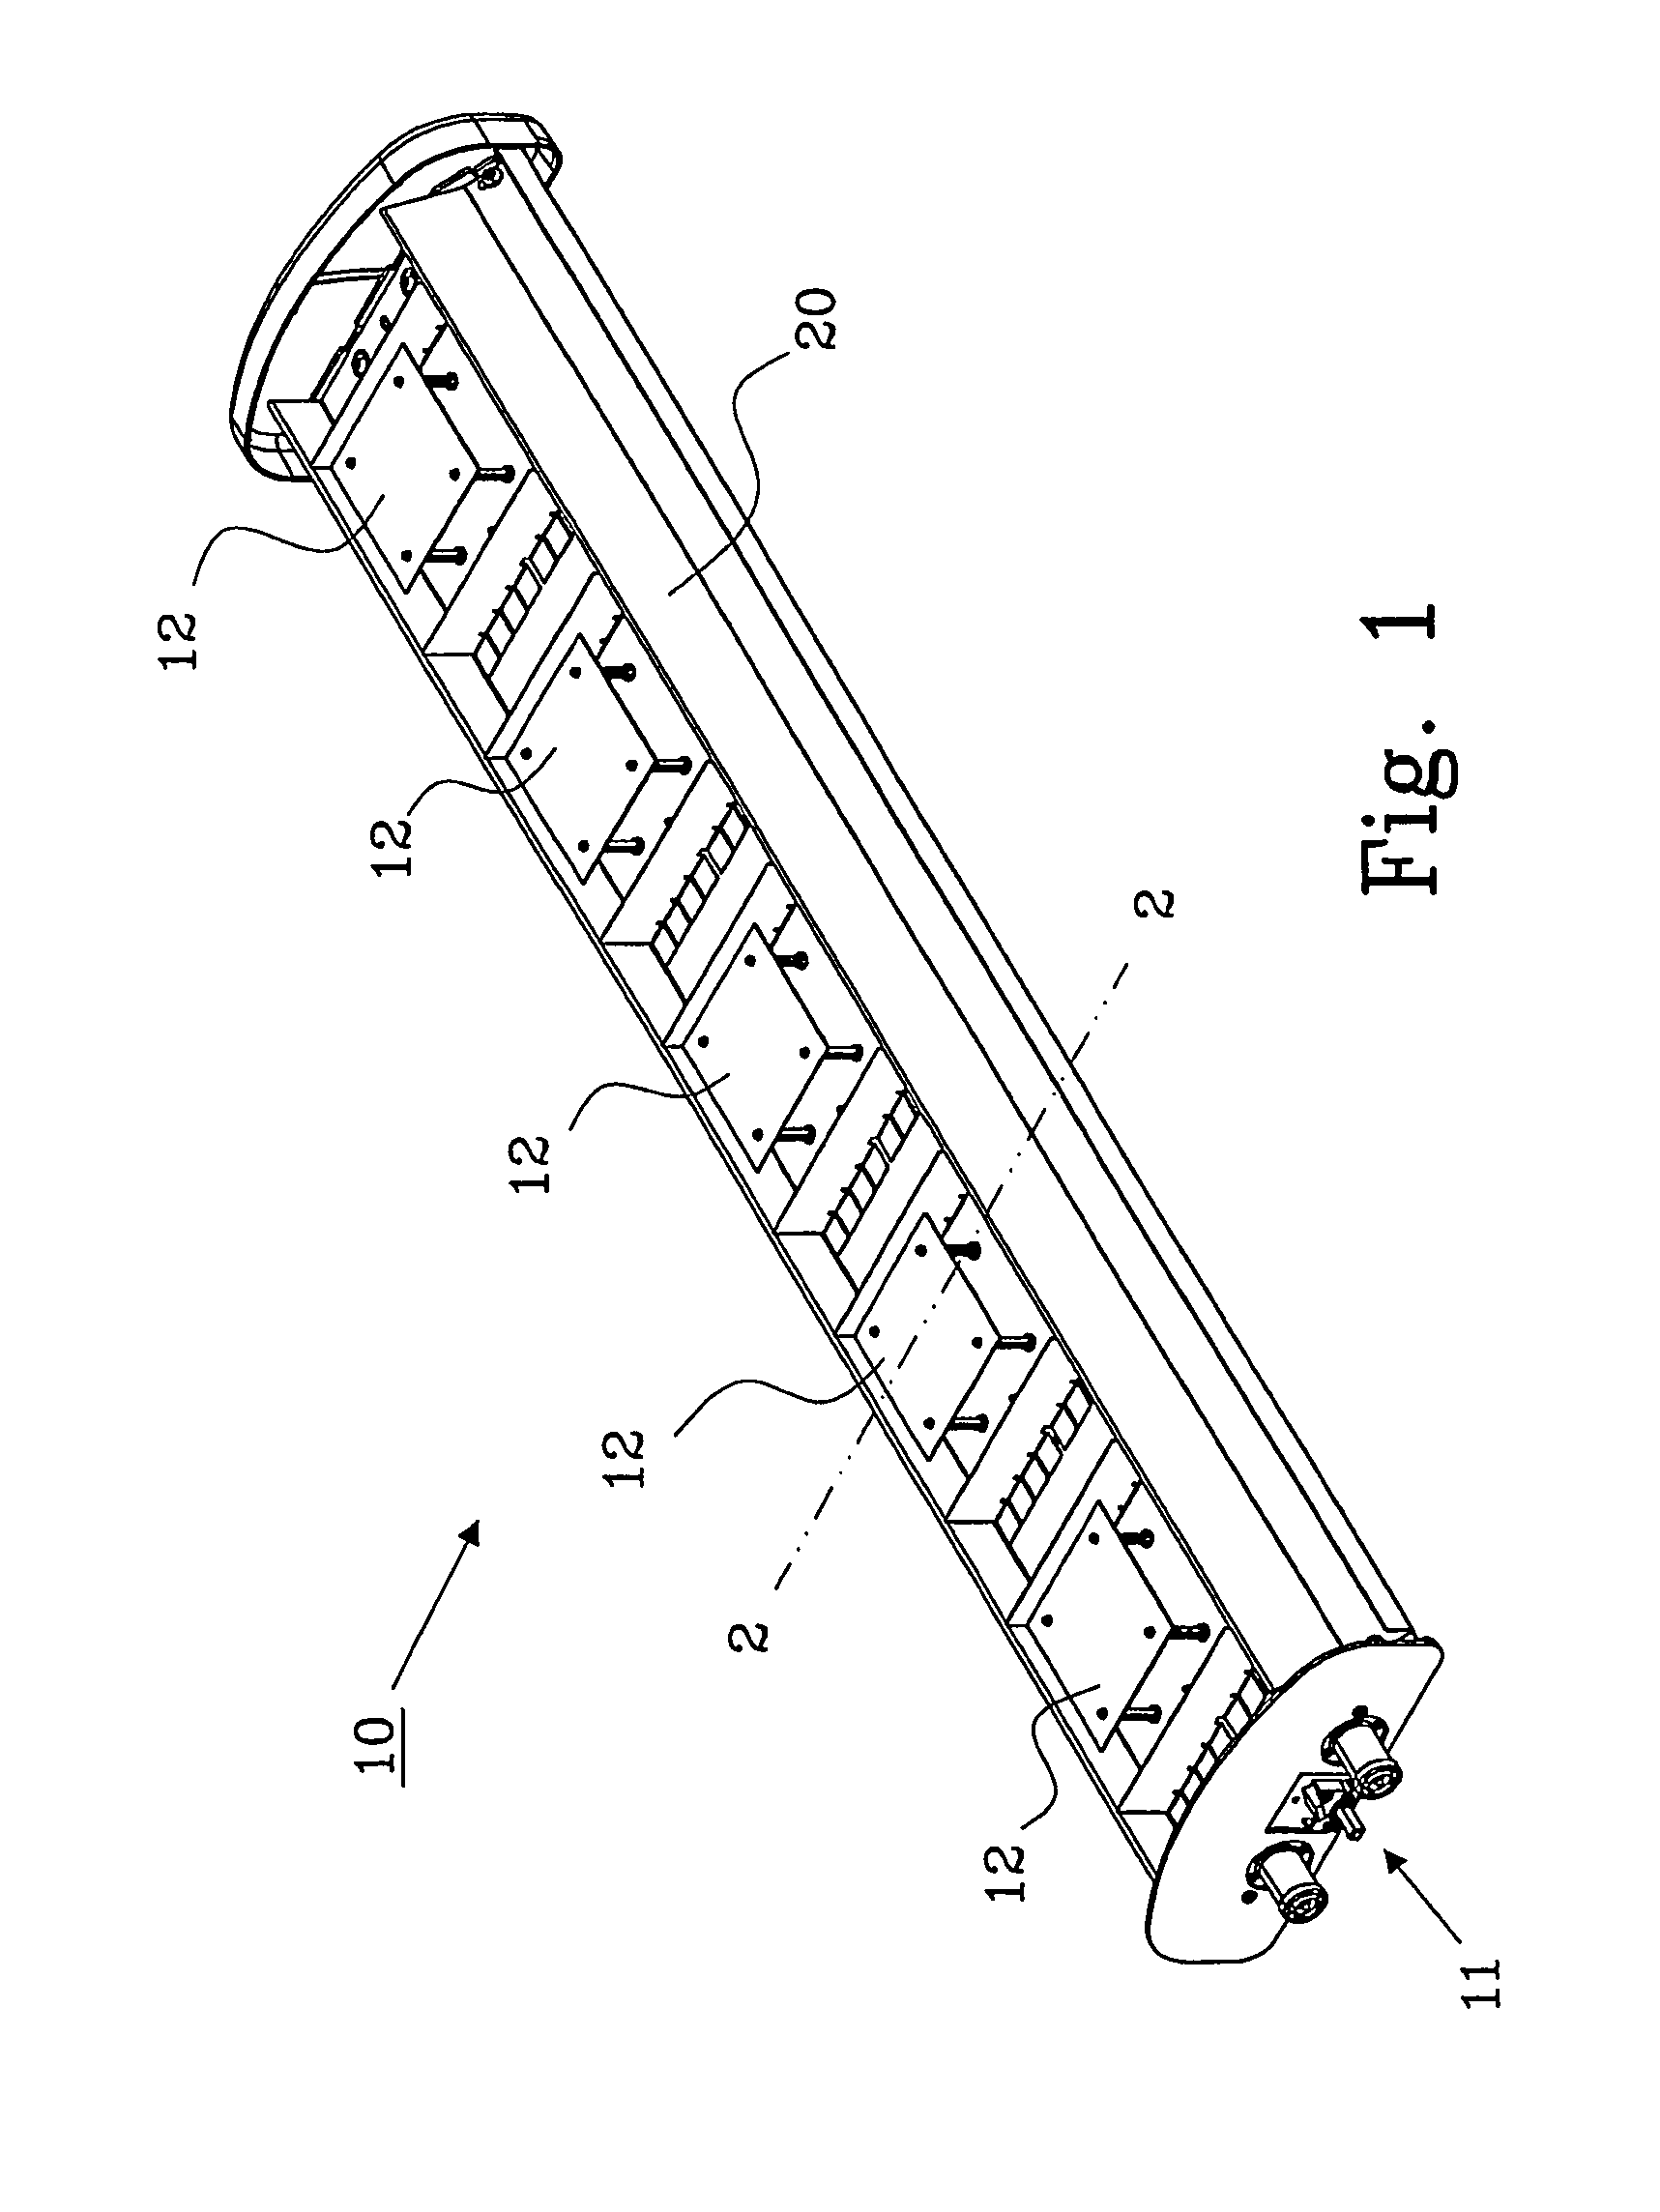 Reflector, an antenna using a reflector and a manufacturing method for a reflector